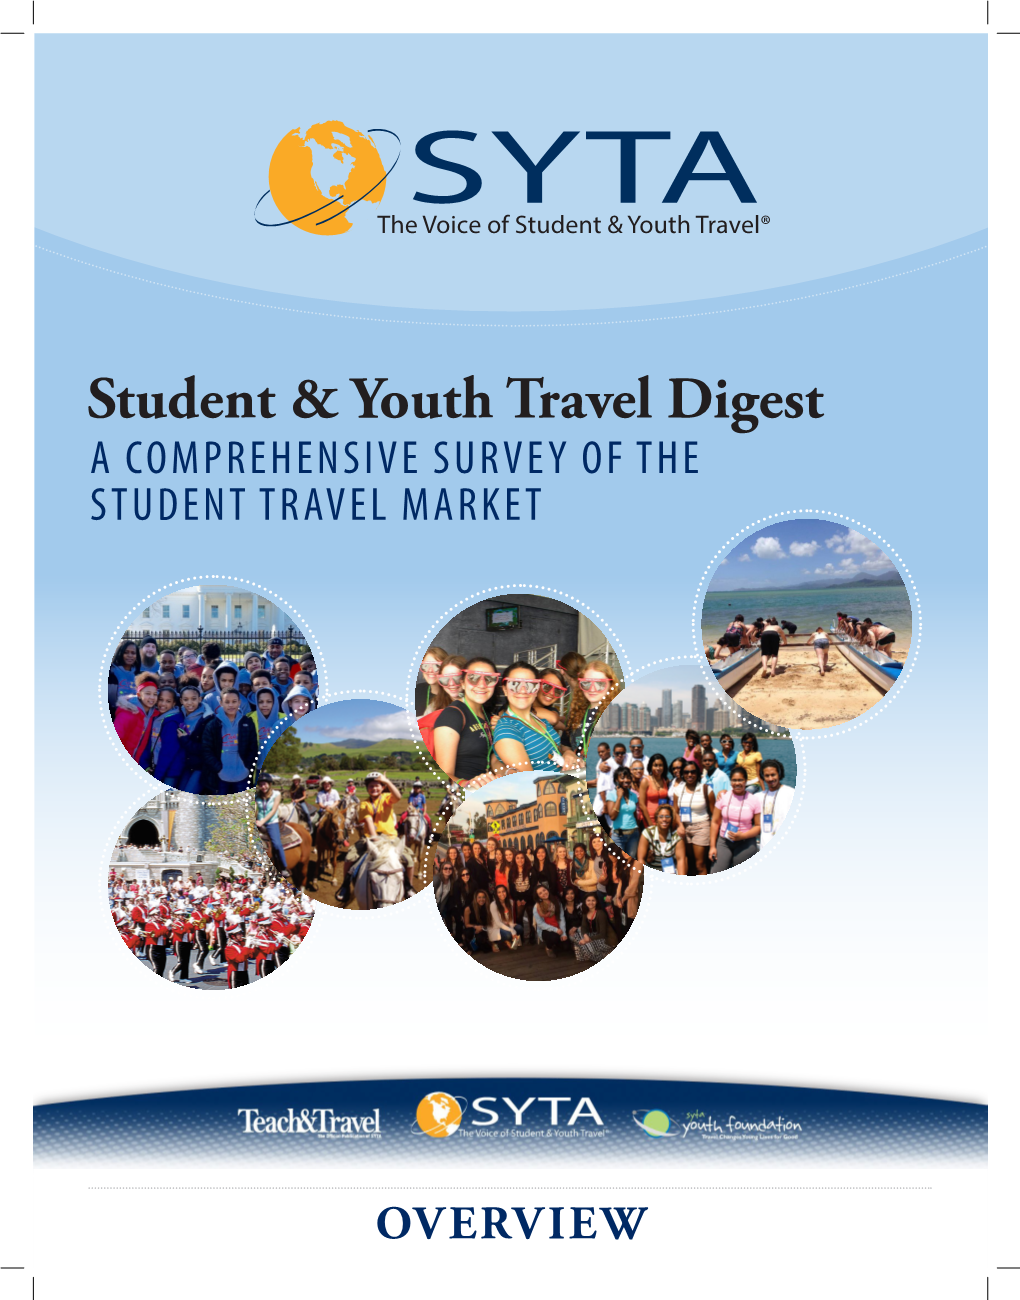 Student & Youth Travel Digest